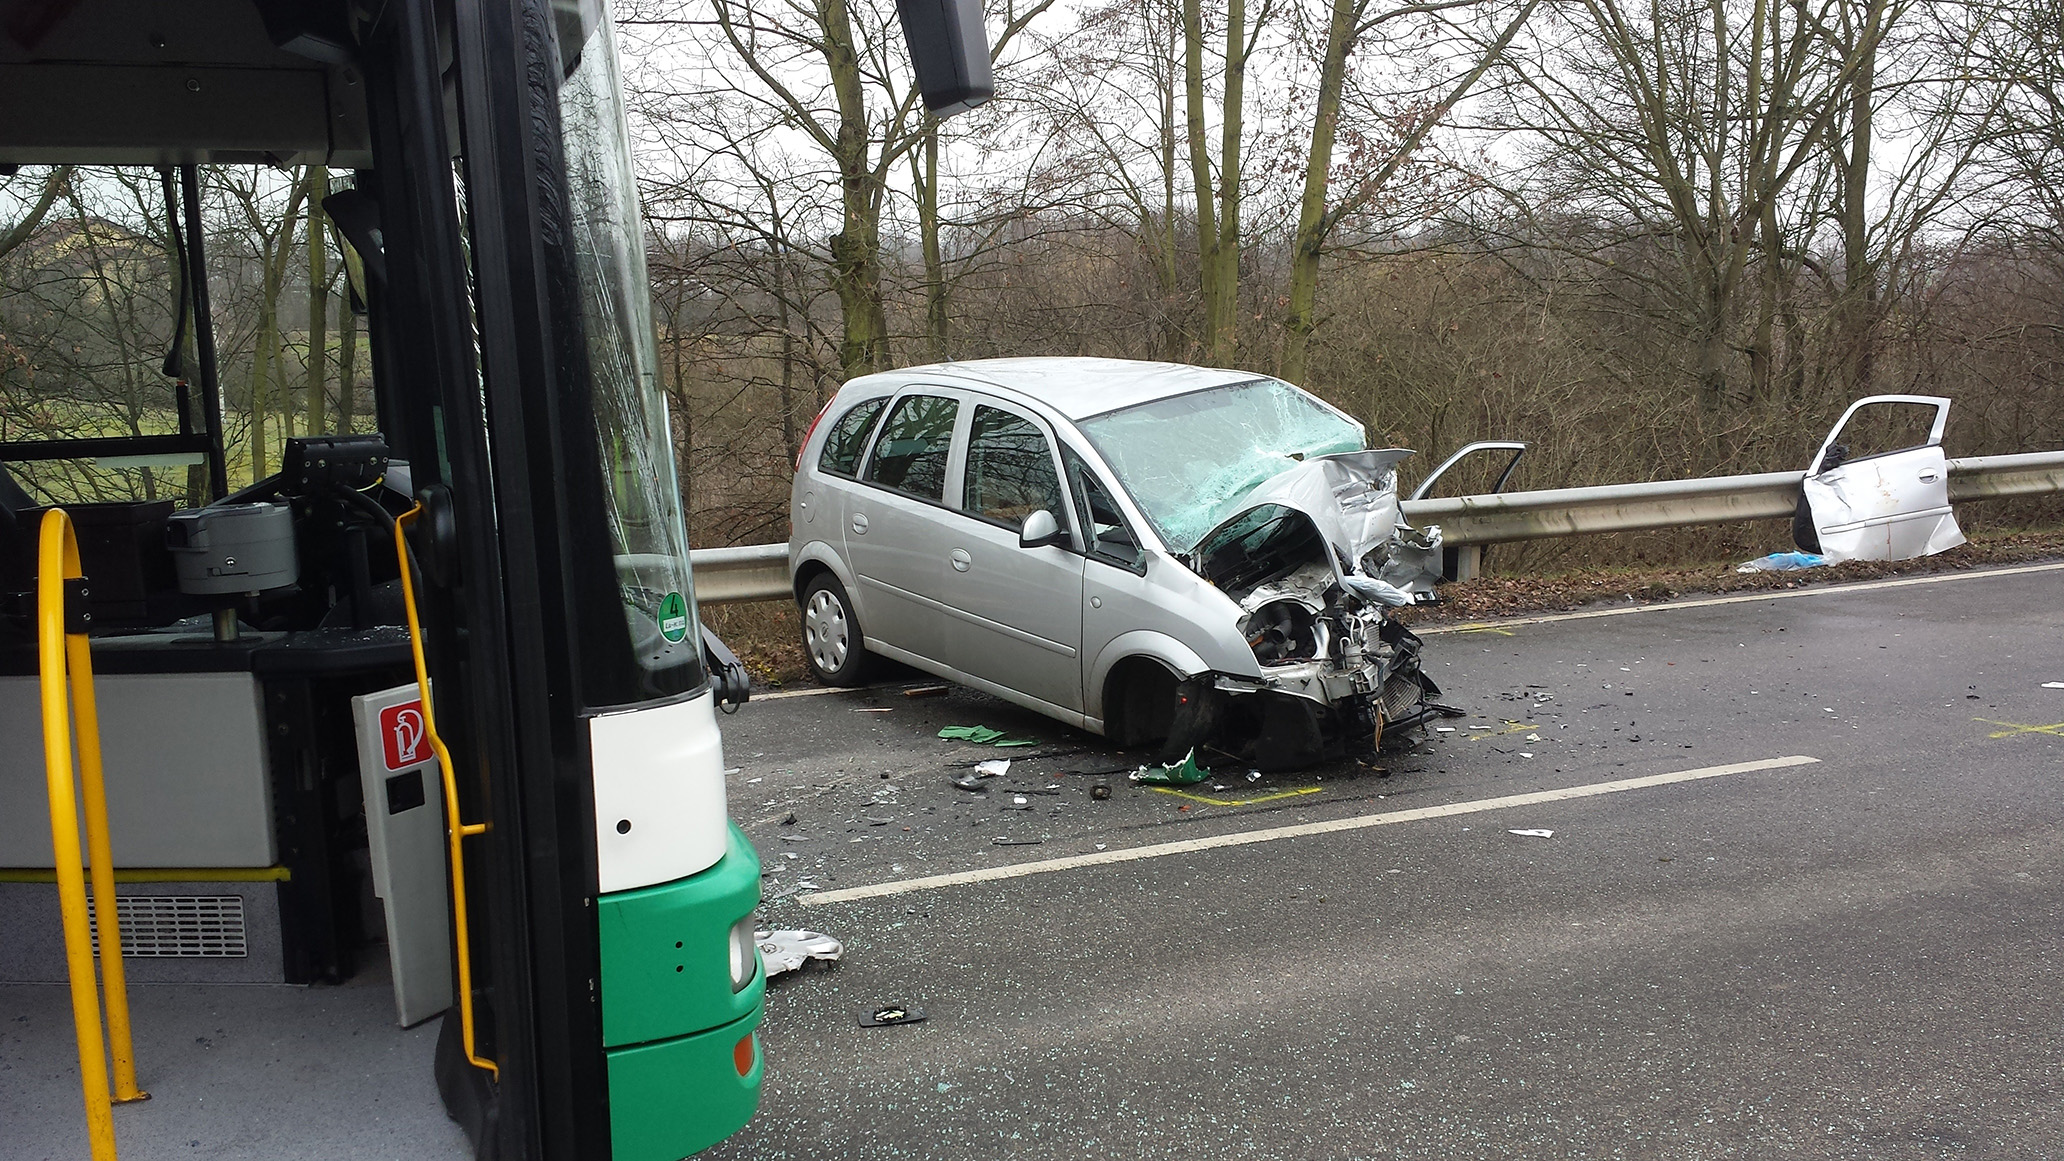 Bus Public Transport Vehicle Collision Wakefield, Road Traffic Accident, Whiplash, Injury Compensation